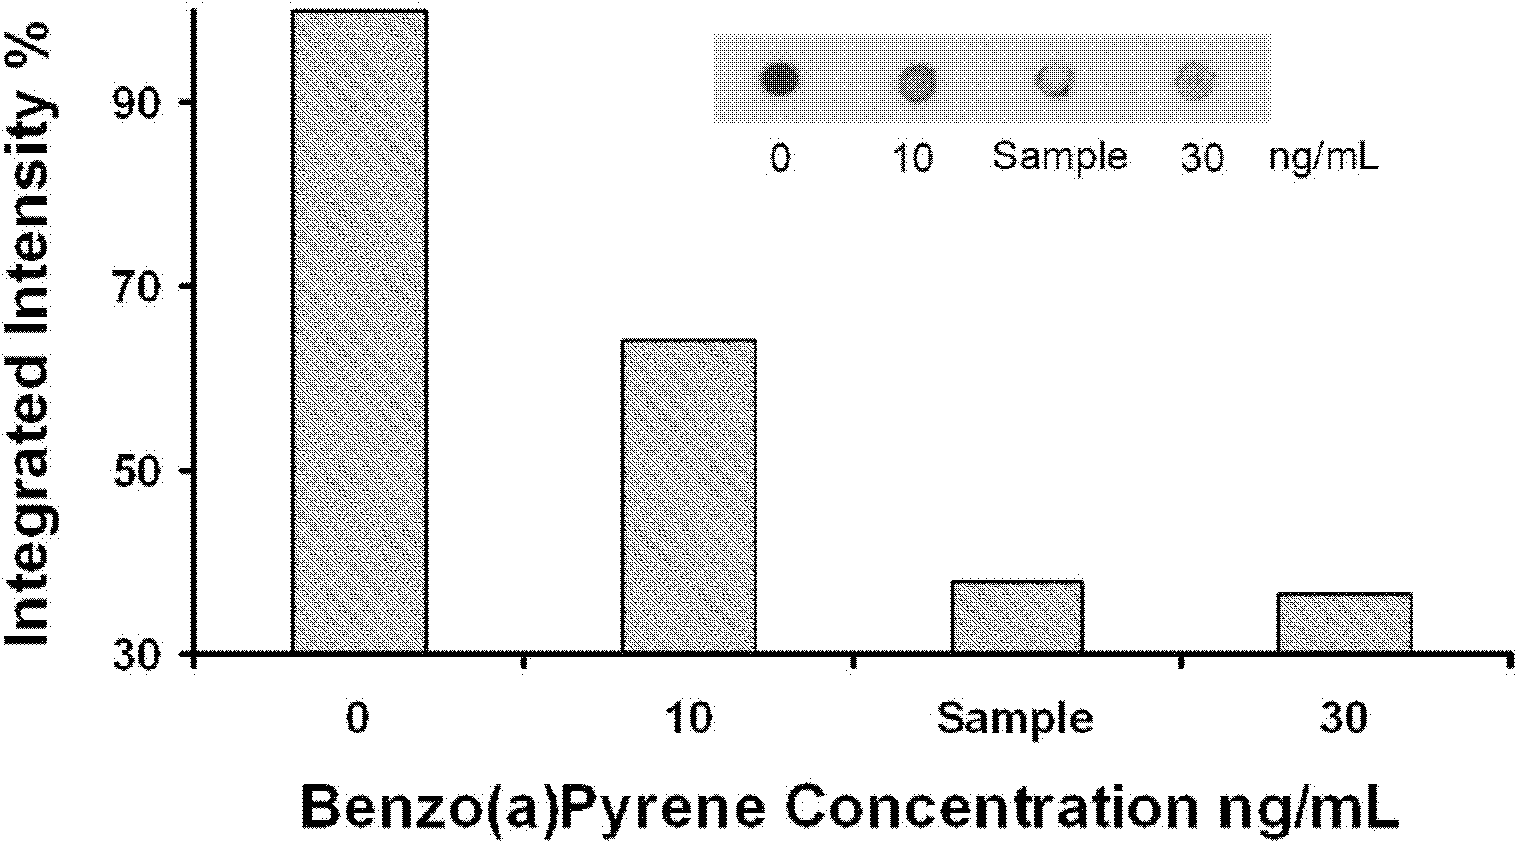 Method for specifically and semiquantitatively detecting benzopyrene